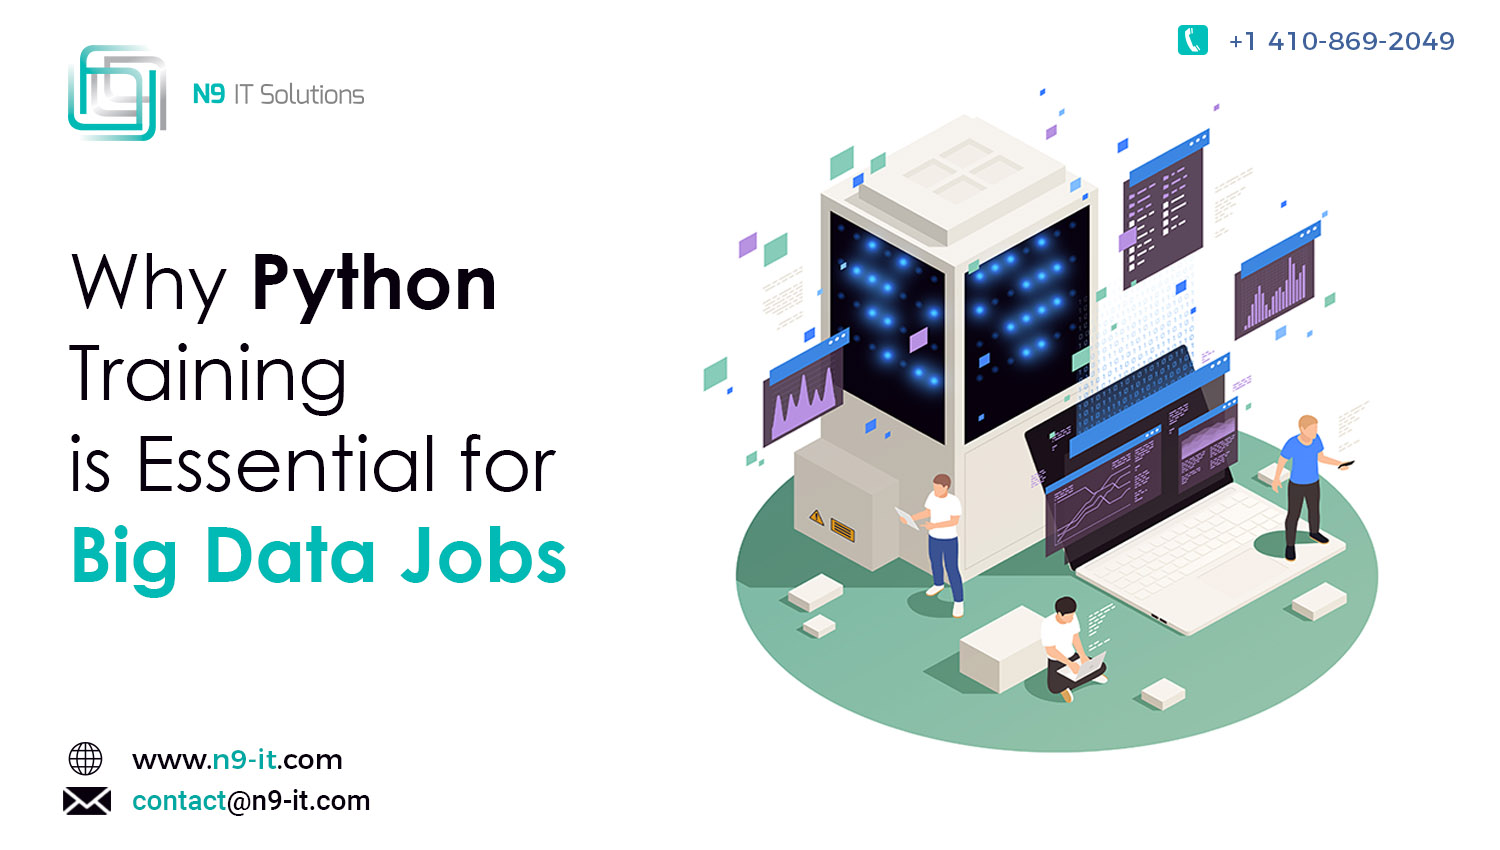 Why Python Training is Essential for Big Data Jobs